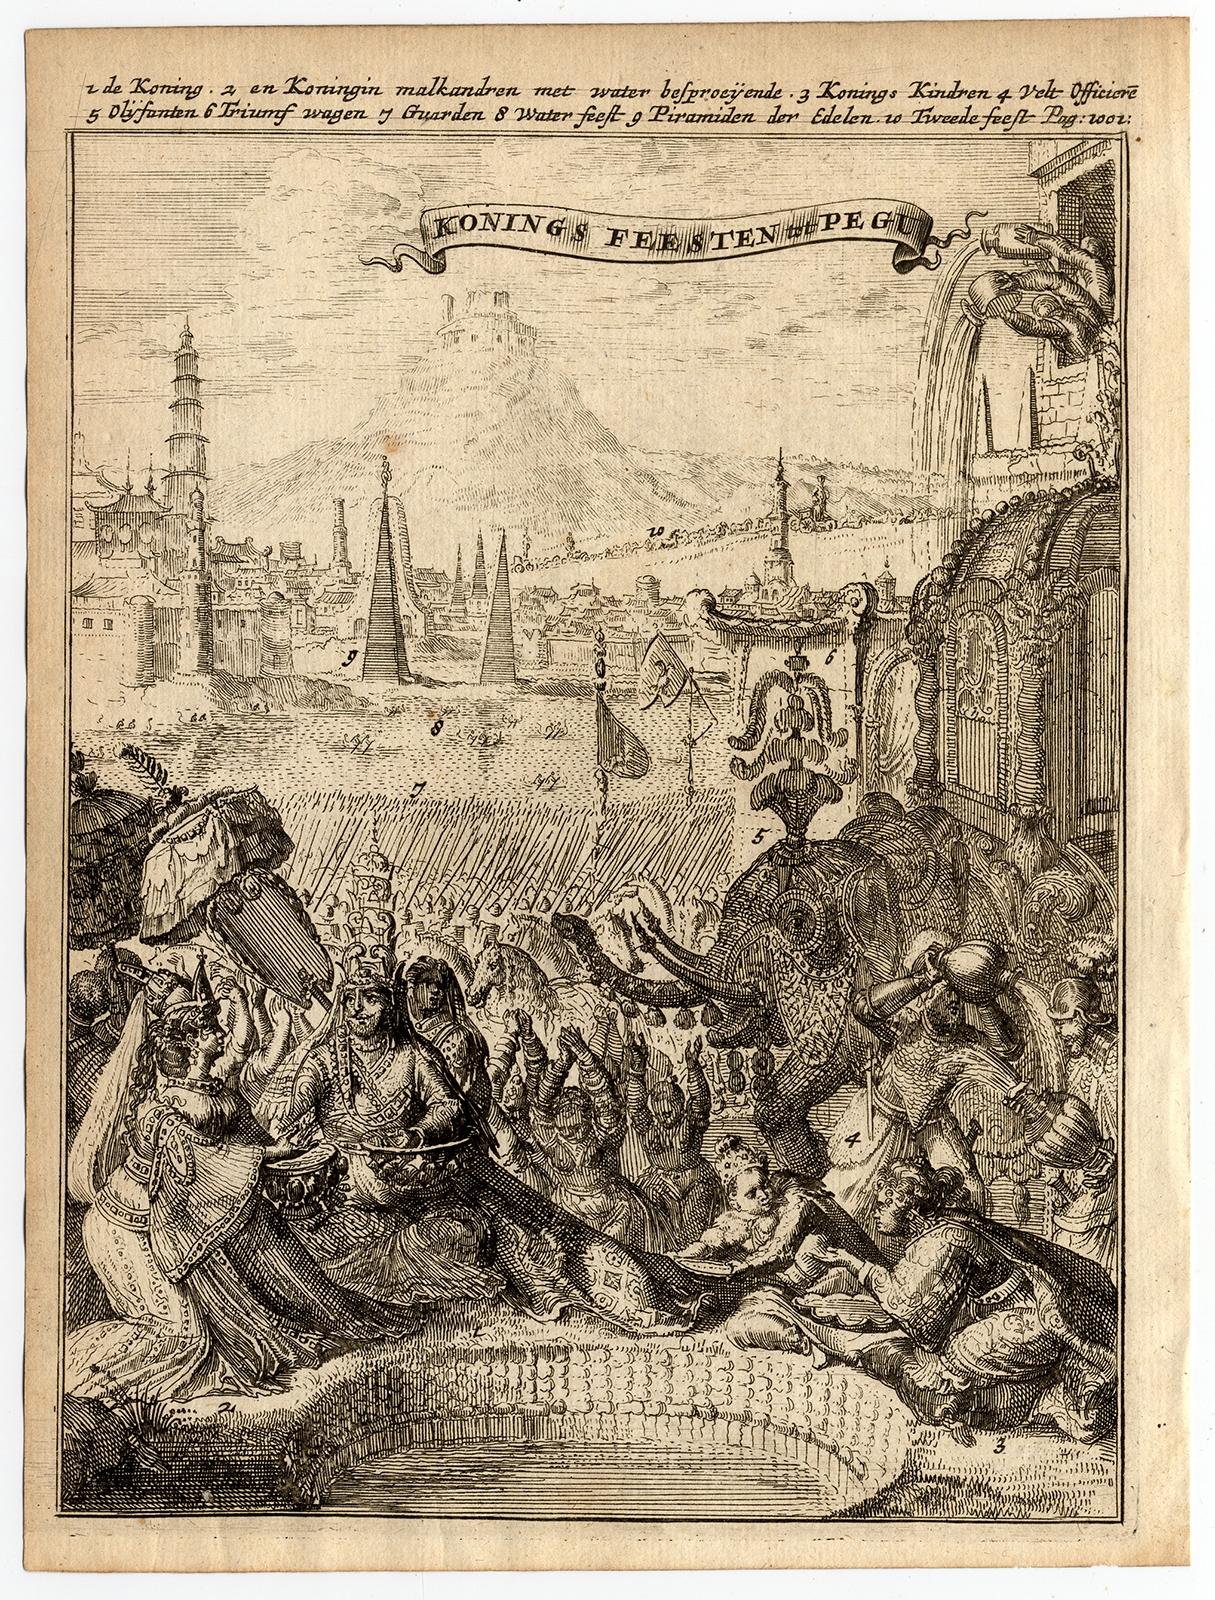 Plate: 'Konings feesten tot Pegu.' (Kings celebrations in Pegu.) 

On this plate: 1. The King. 2. And the Queen, sprinkling water on each other. 3. Their children. 4. Officers. 5. Elephants. 6. Triumphal wagon. 7. Guards. 8. Water feast. 9.